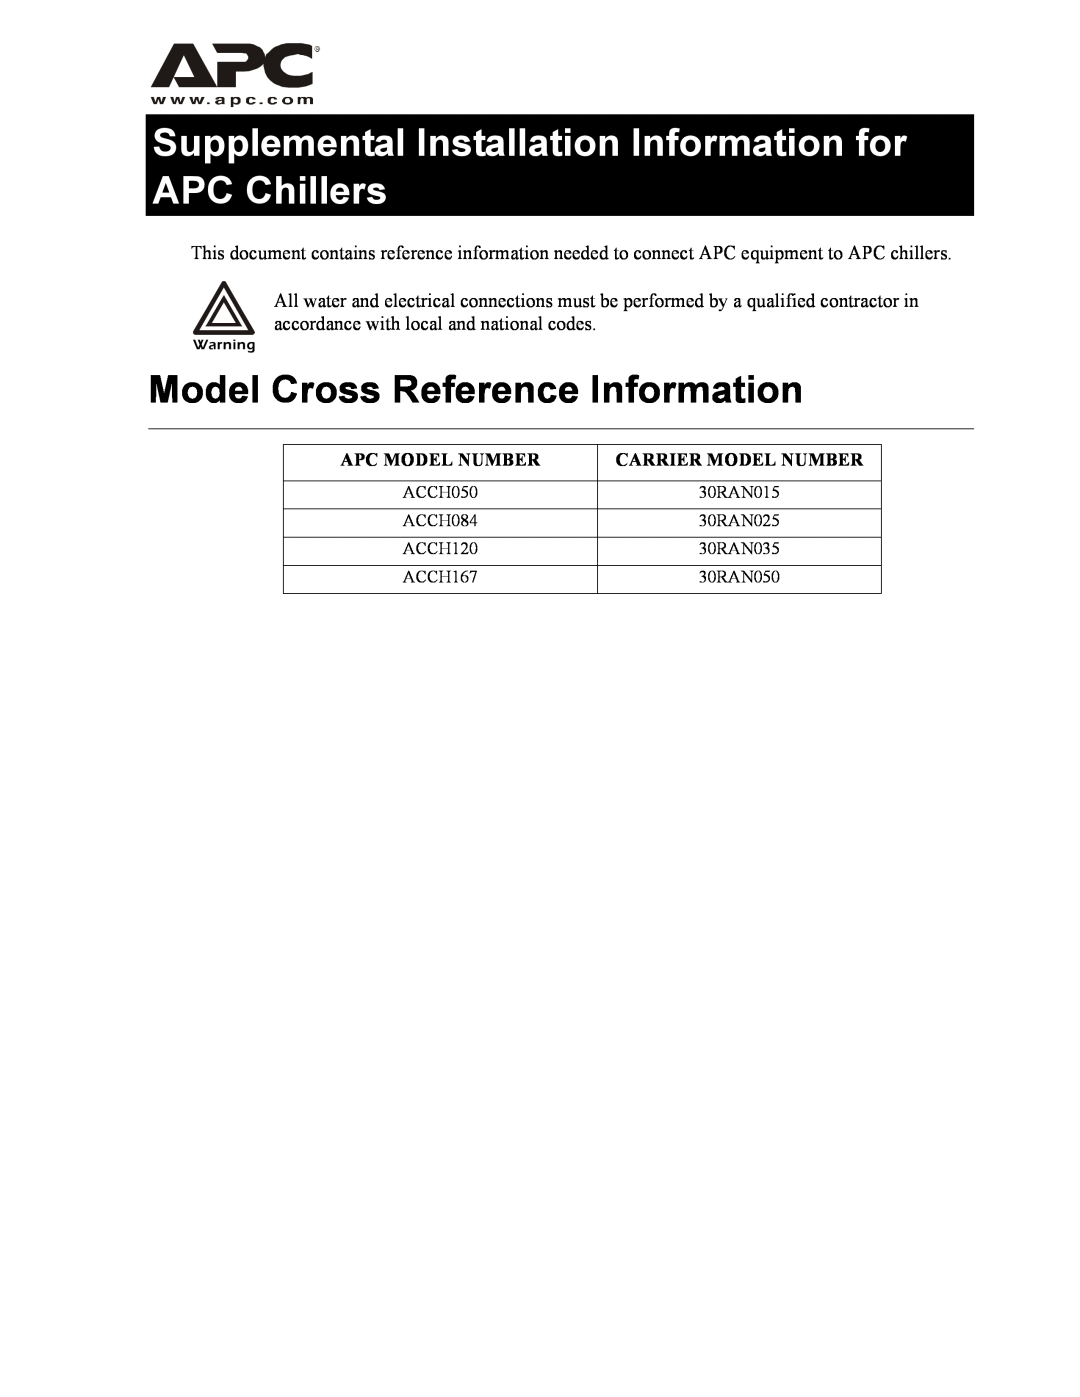 American Power Conversion ACCH084 manual Model Cross Reference Information, Apc Model Number, Carrier Model Number 